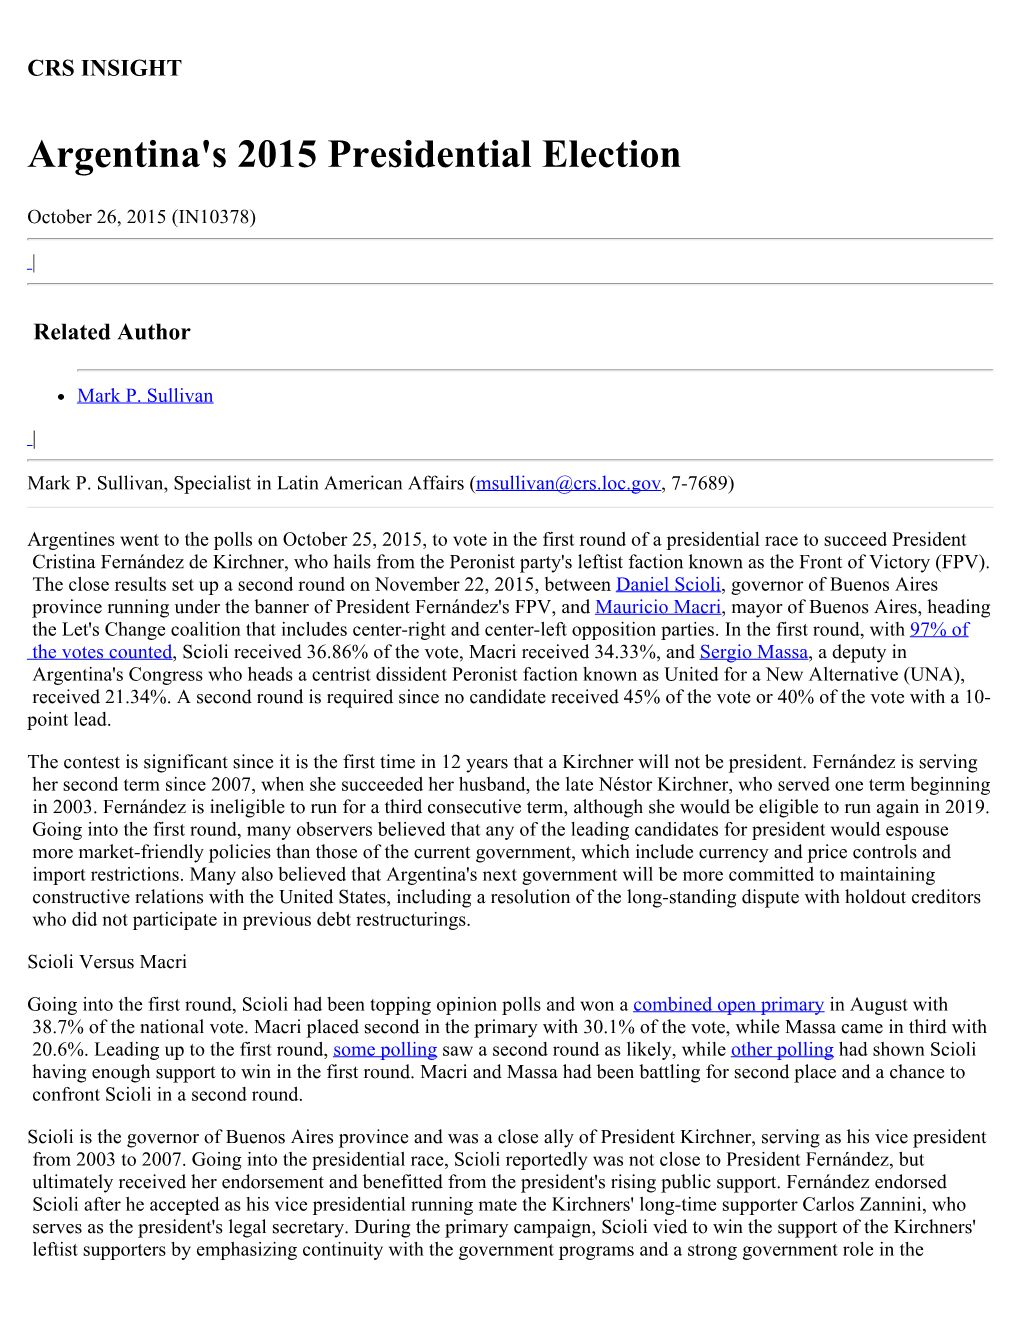 Argentina's 2015 Presidential Election